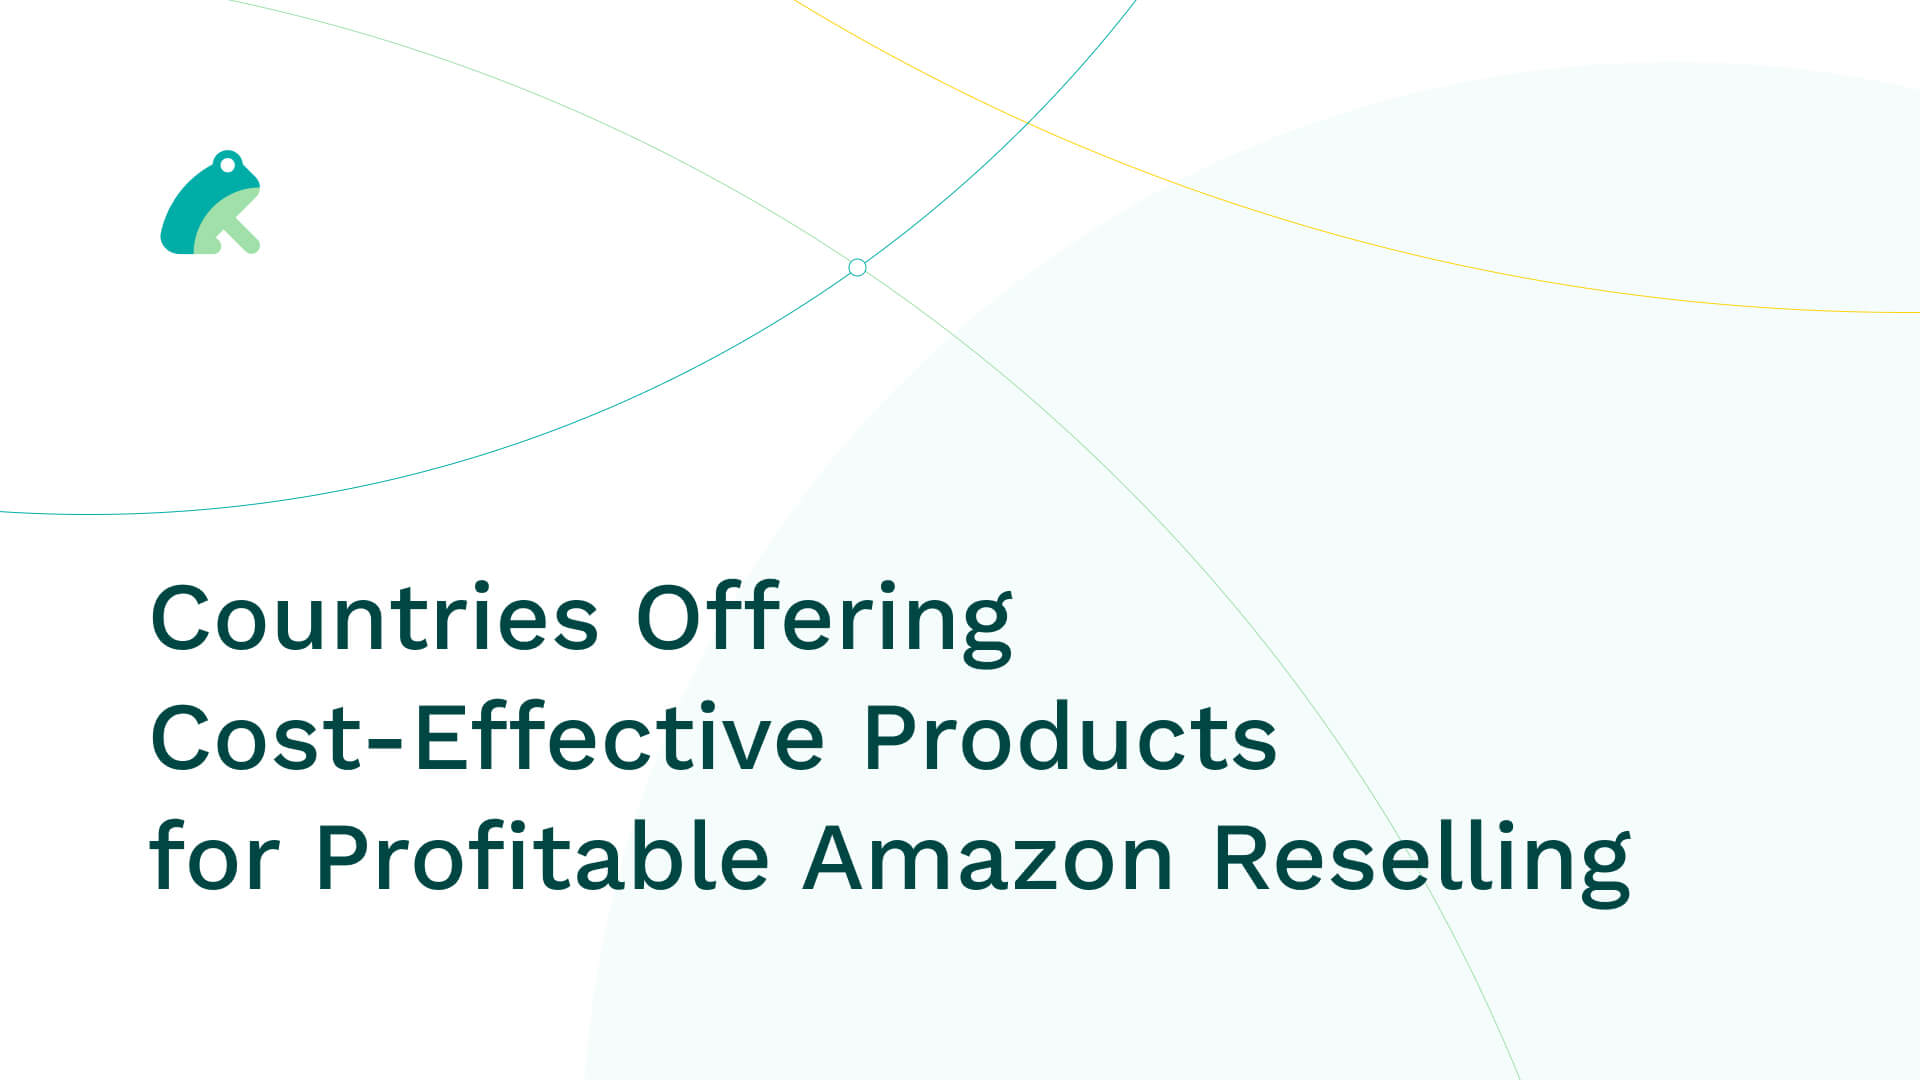 Countries Offering Cost-Effective Products for Profitable Amazon Reselling